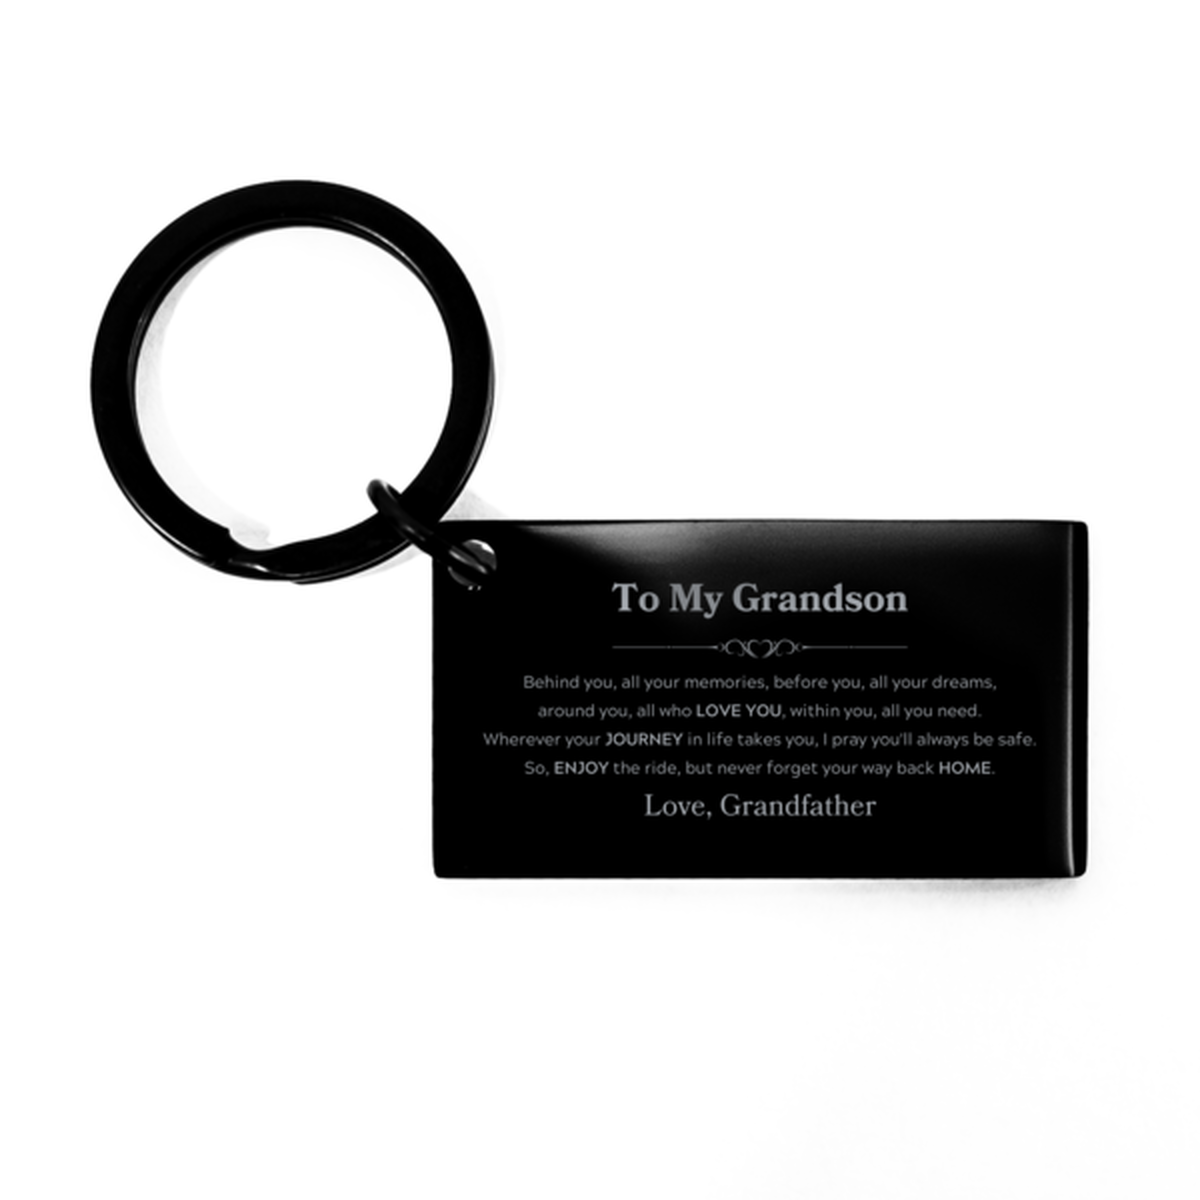 To My Grandson Graduation Gifts from Grandfather, Grandson Keychain Christmas Birthday Gifts for Grandson Behind you, all your memories, before you, all your dreams. Love, Grandfather